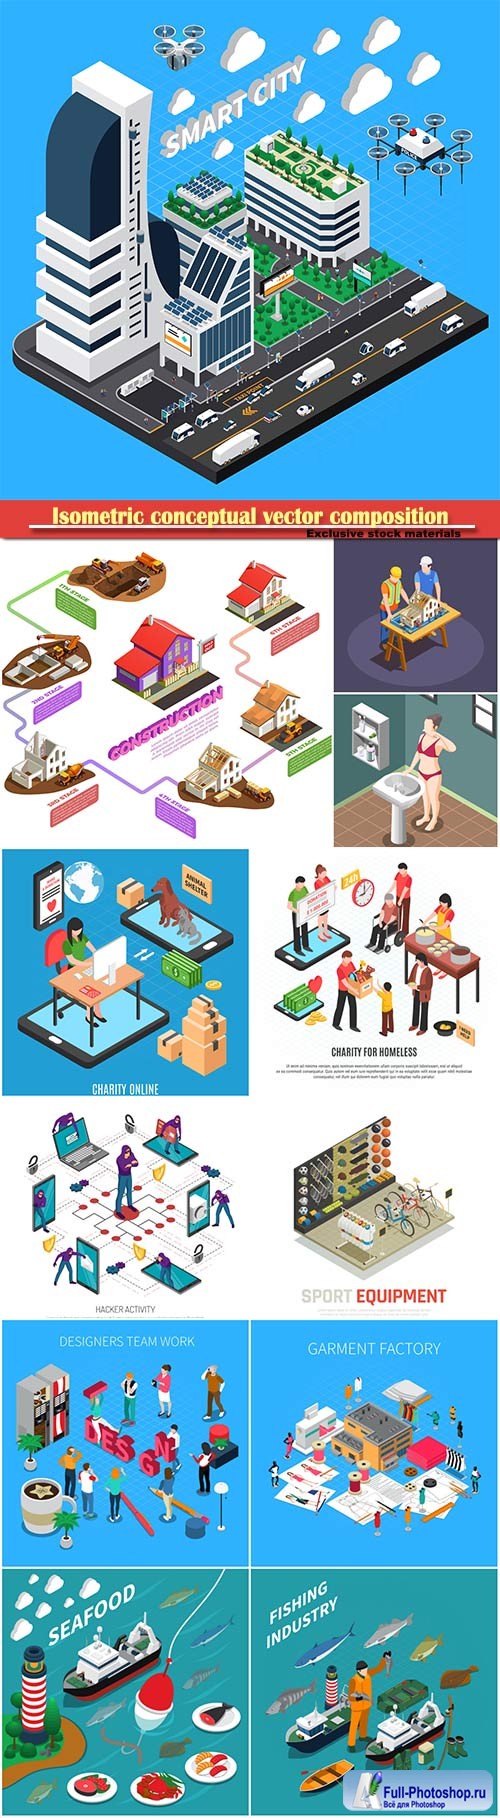 Isometric conceptual vector composition, infographics template # 26